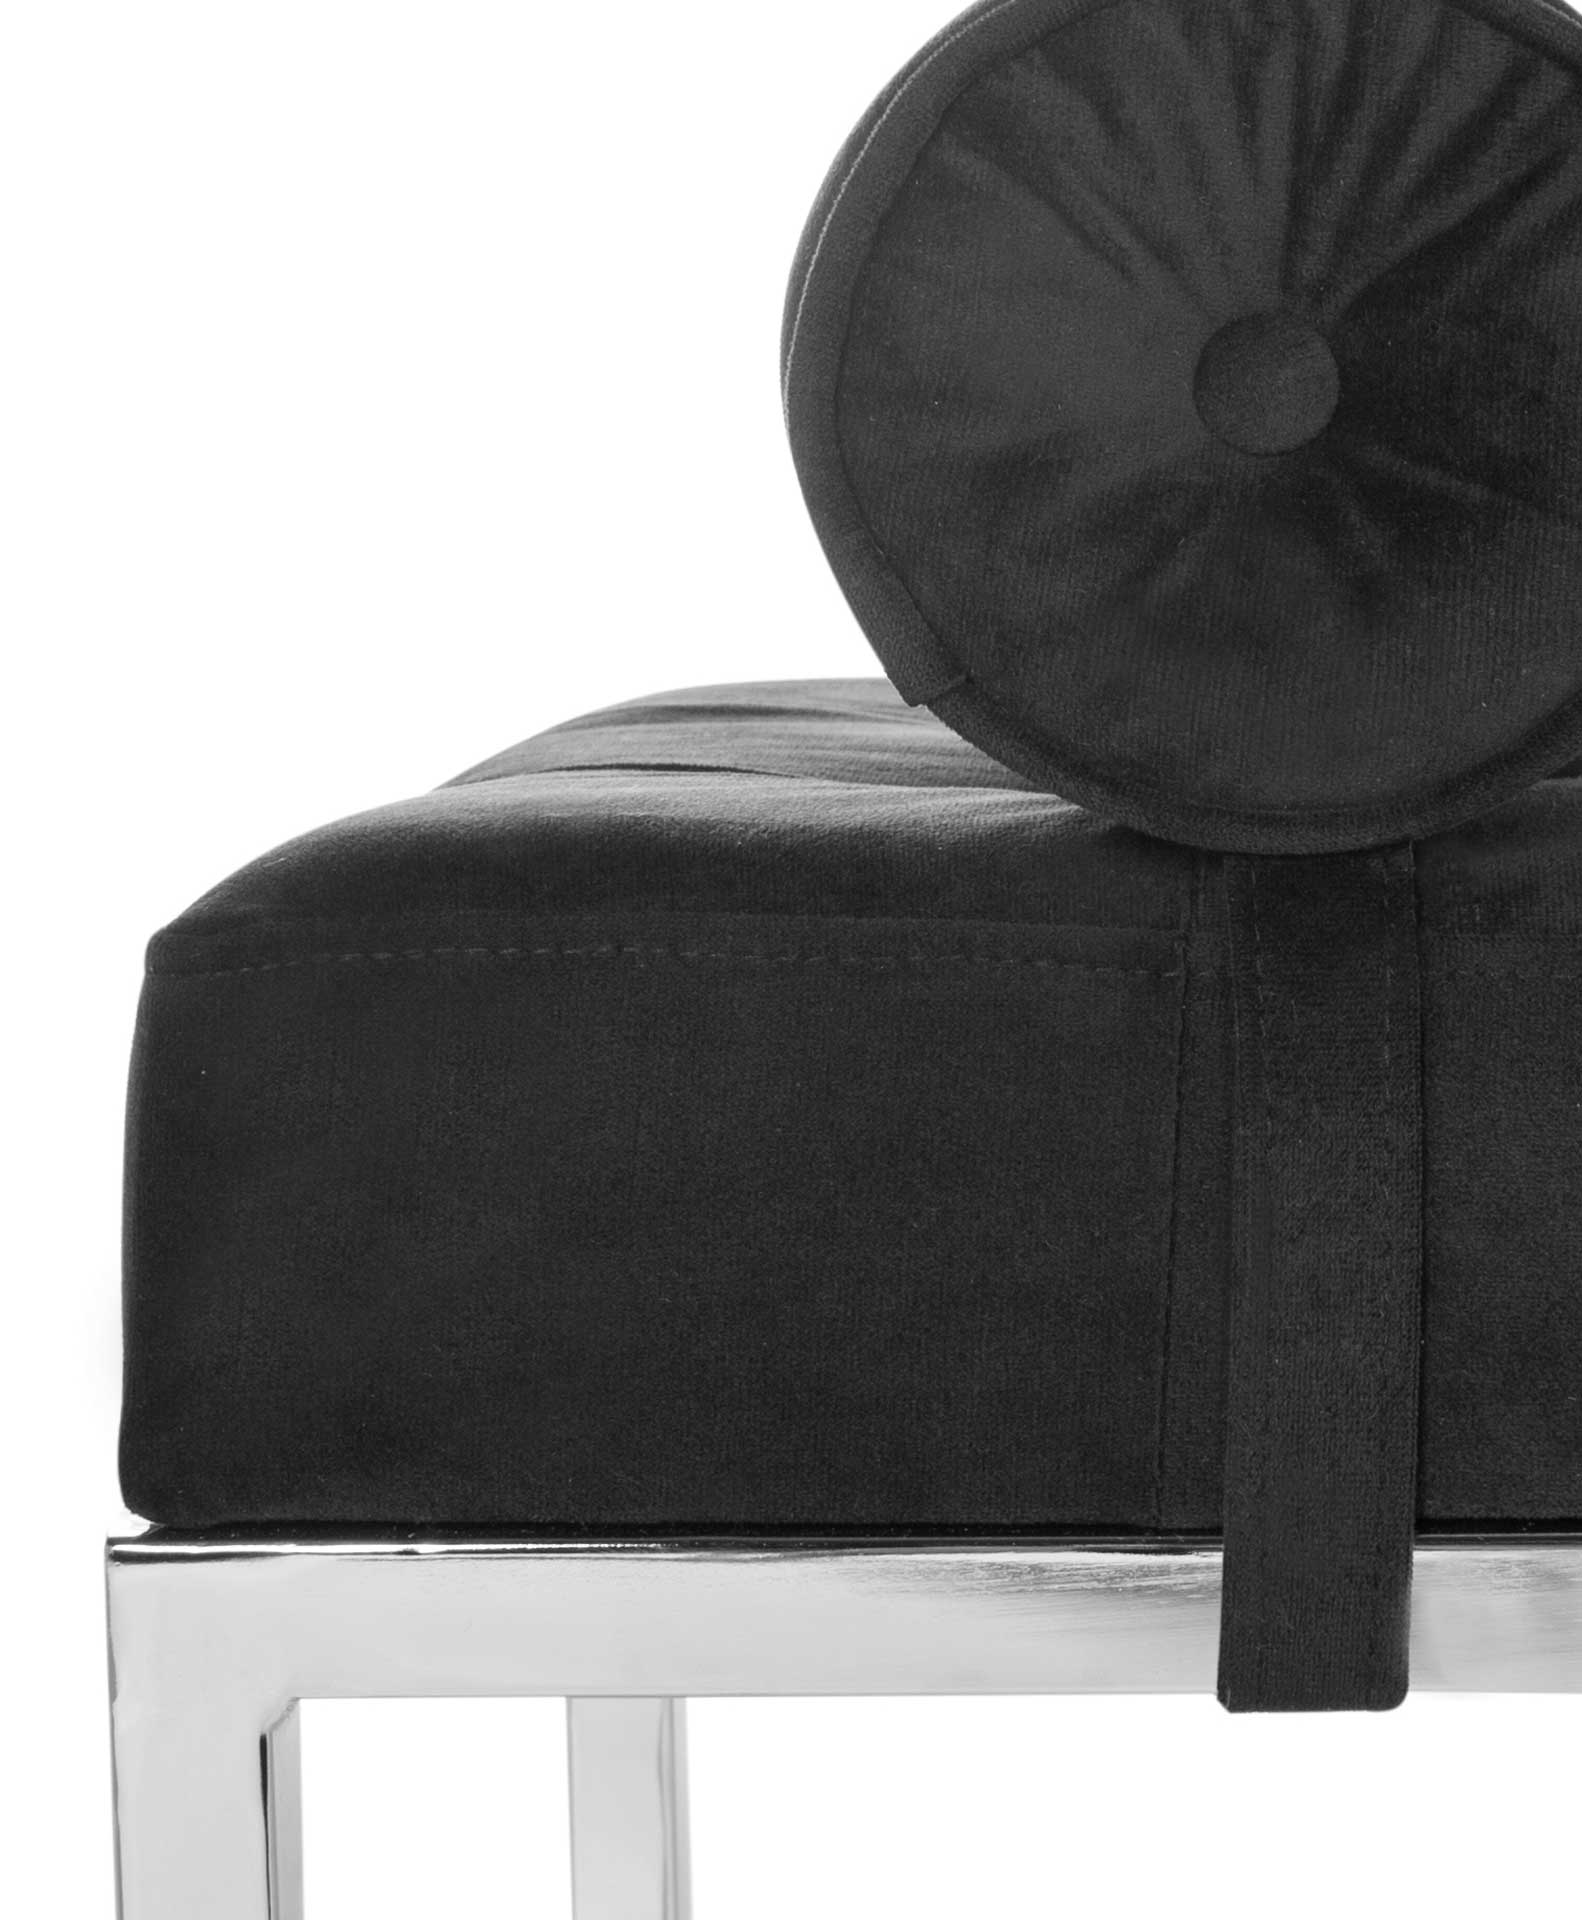 Xander Sueade Tufted Bench With Bench Black